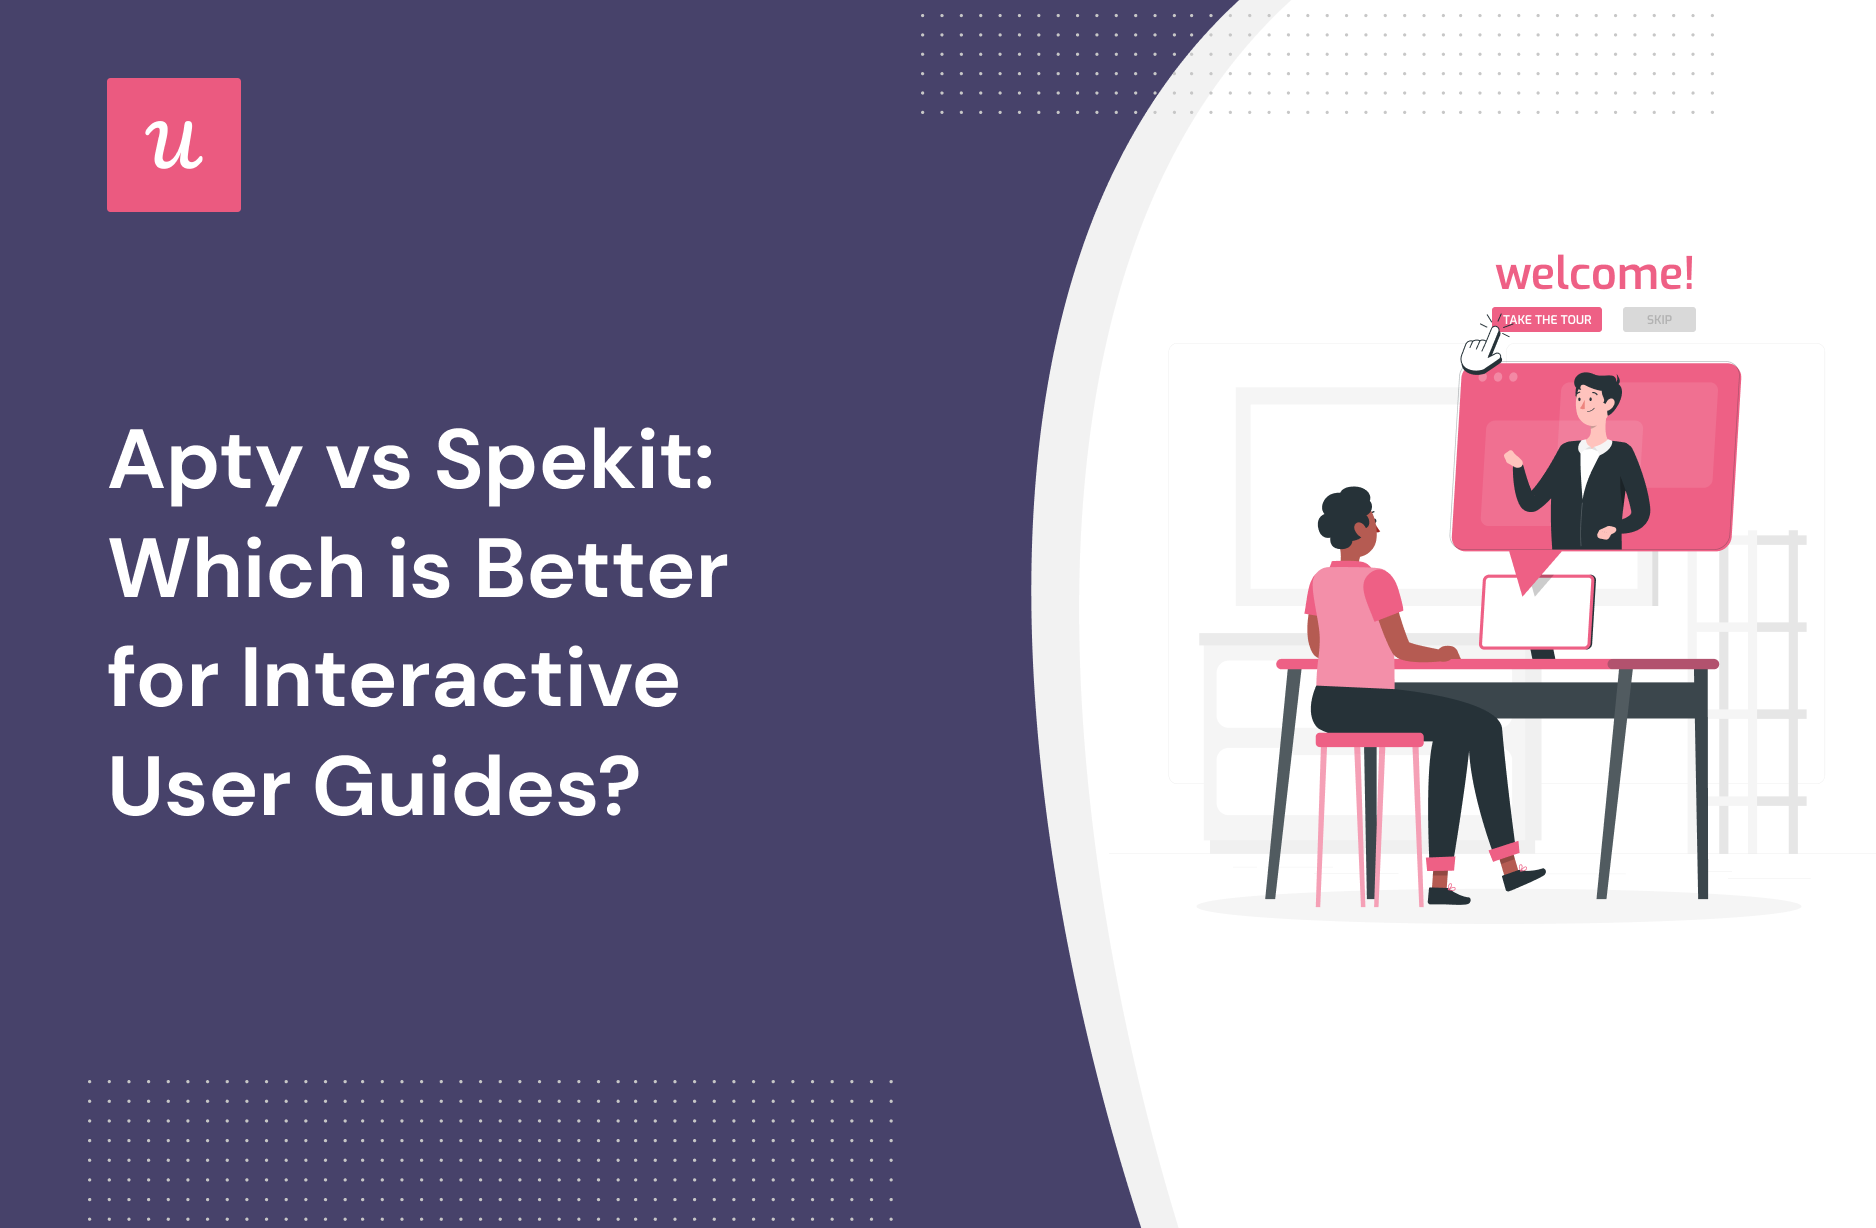 Apty vs Spekit: Which is Better for Interactive User Guides?